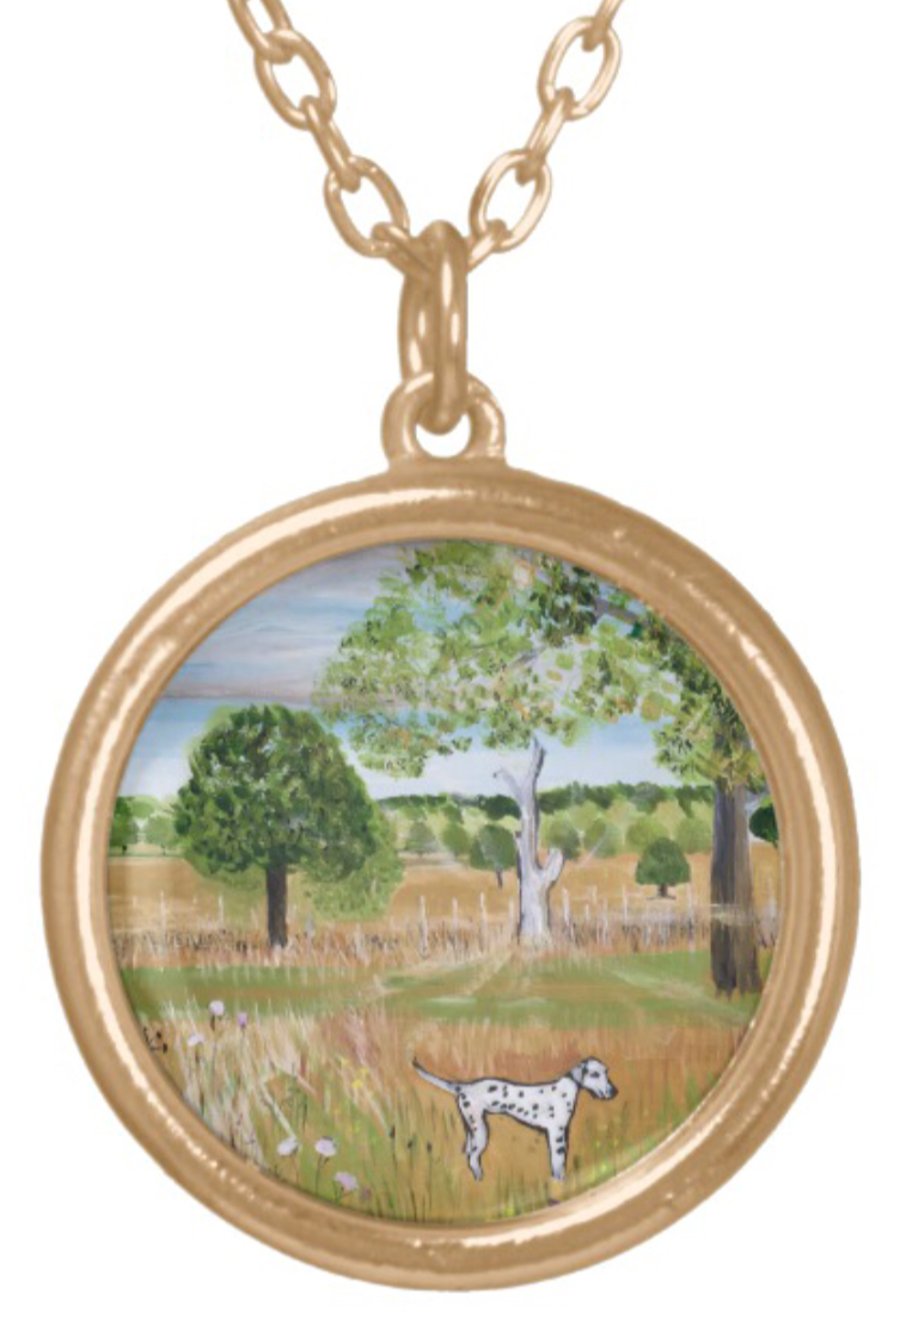 Beautiful Pendant featuring the design ‘Fields Of Gold’